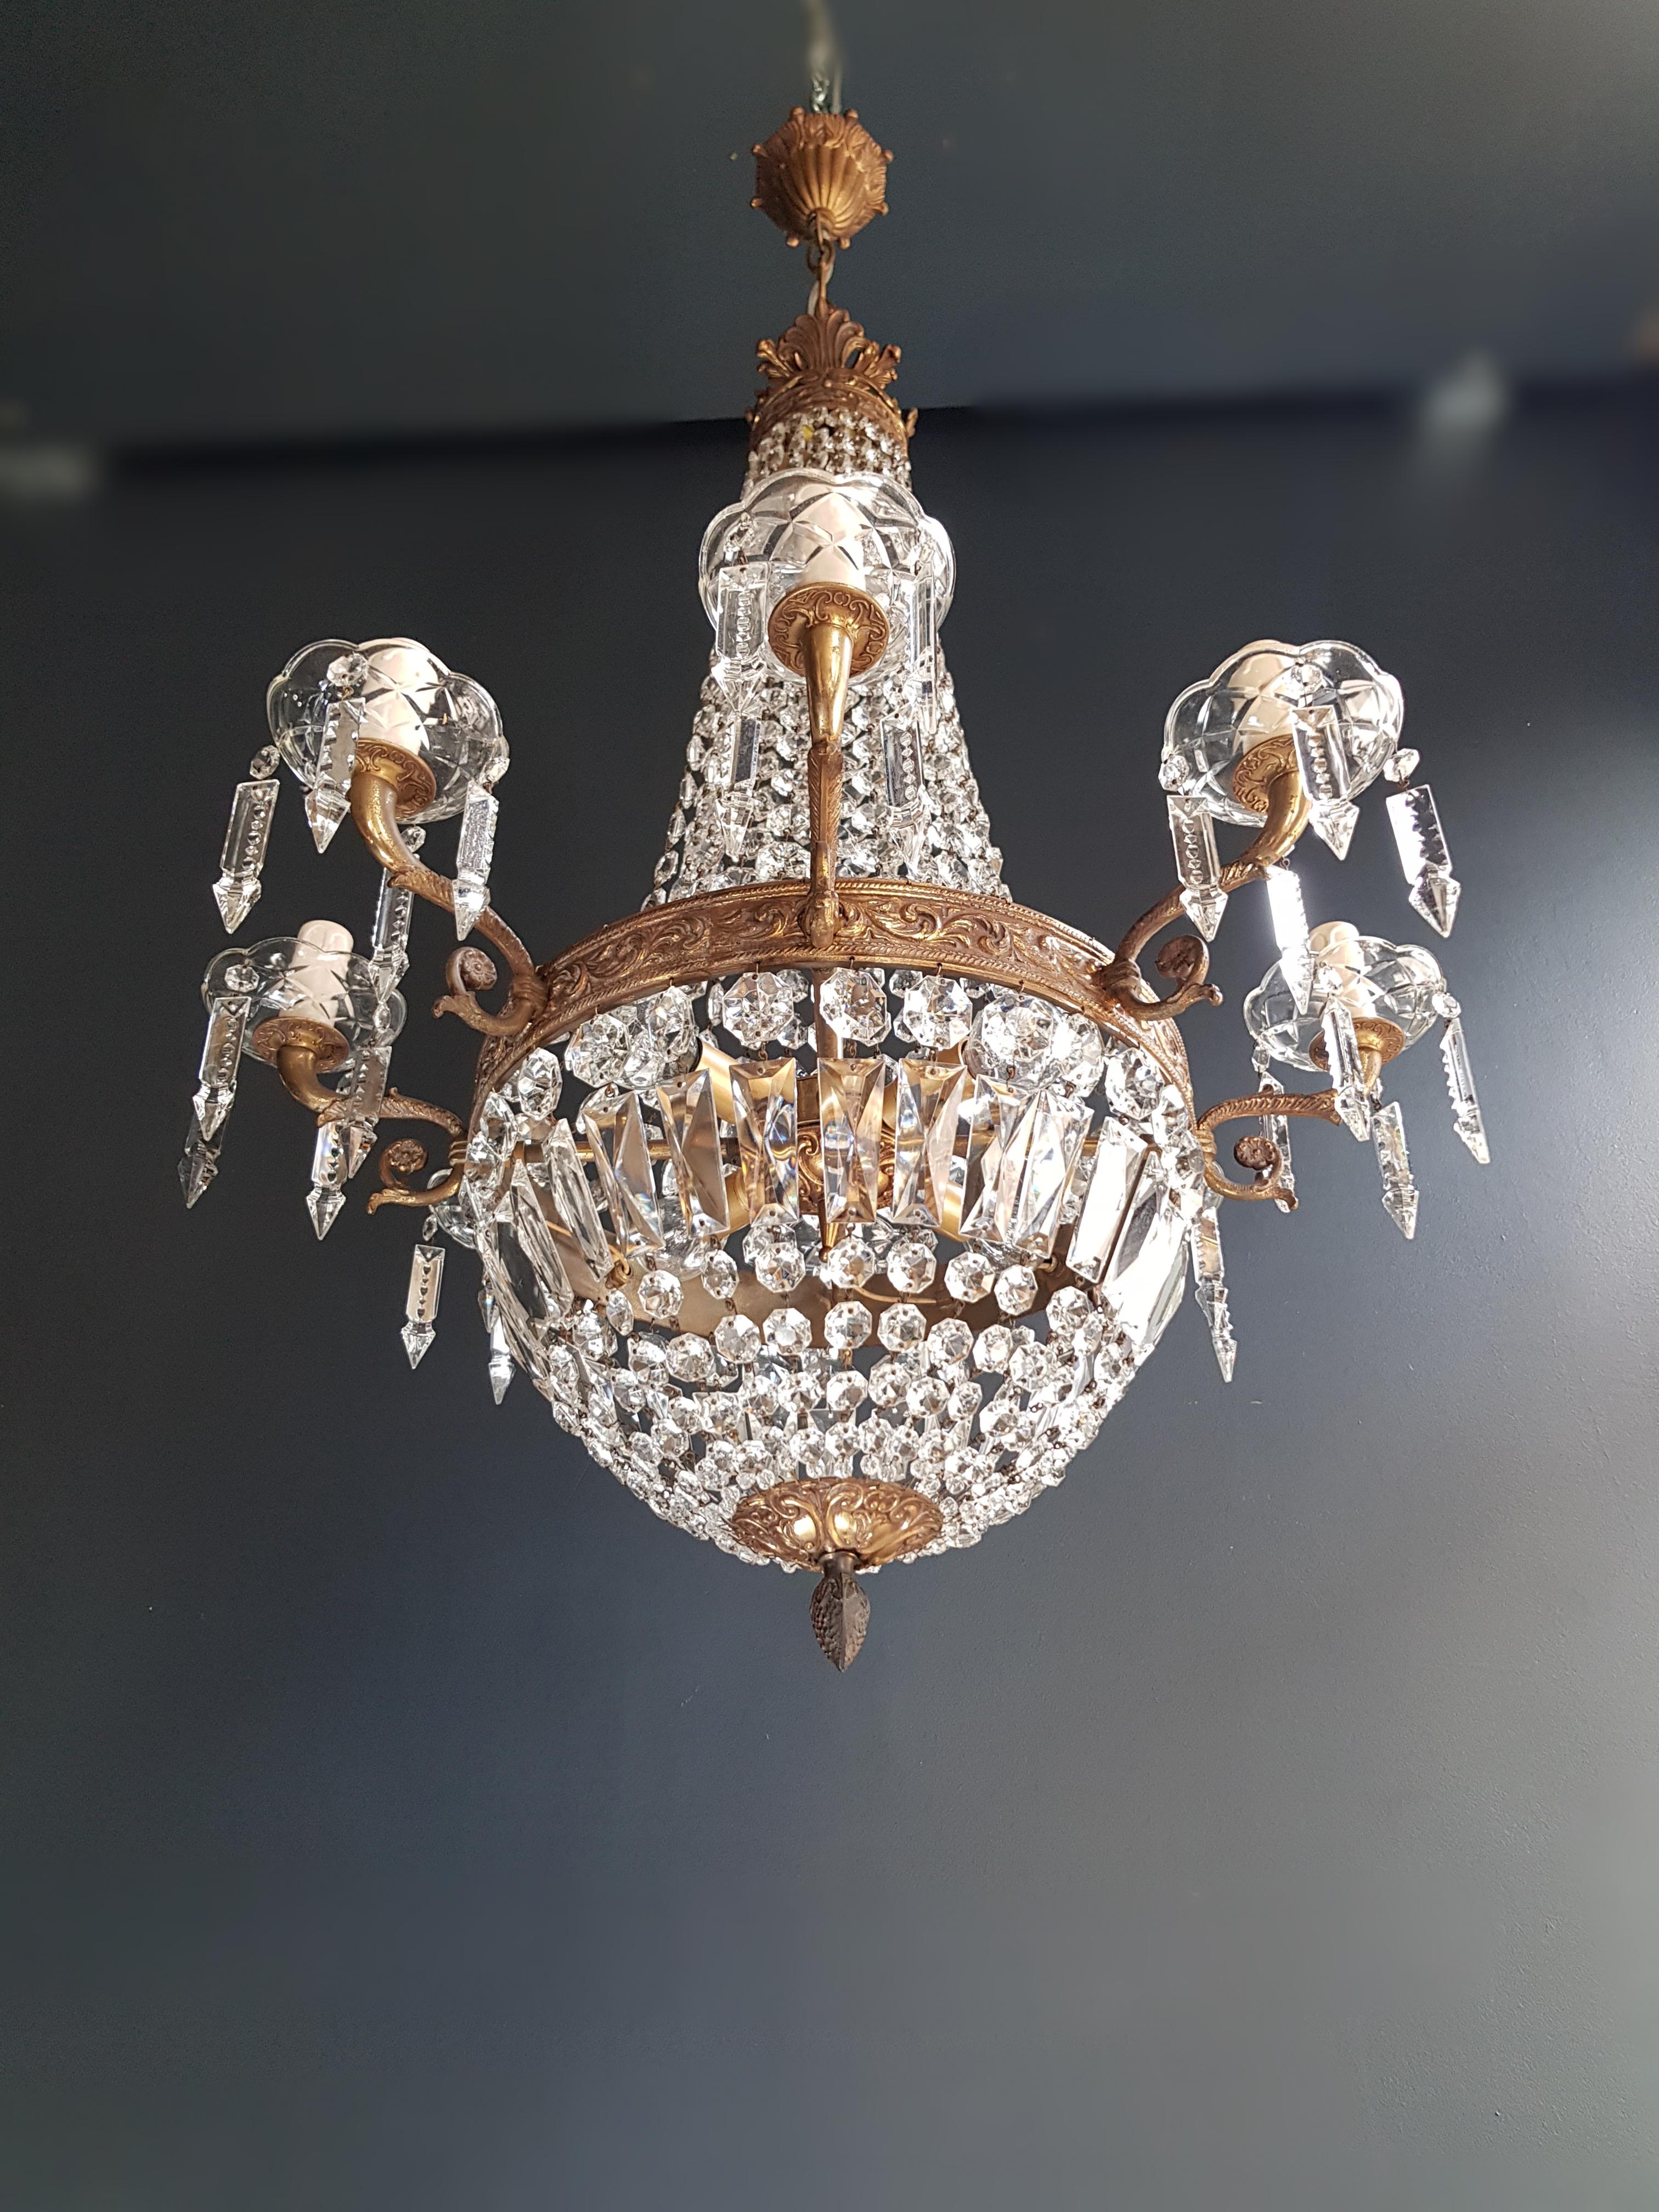 Hand-Knotted Montgolfiè Empire Sac a Pearl Chandelier Crystal Lustre Ceiling Lamp Antique WoW